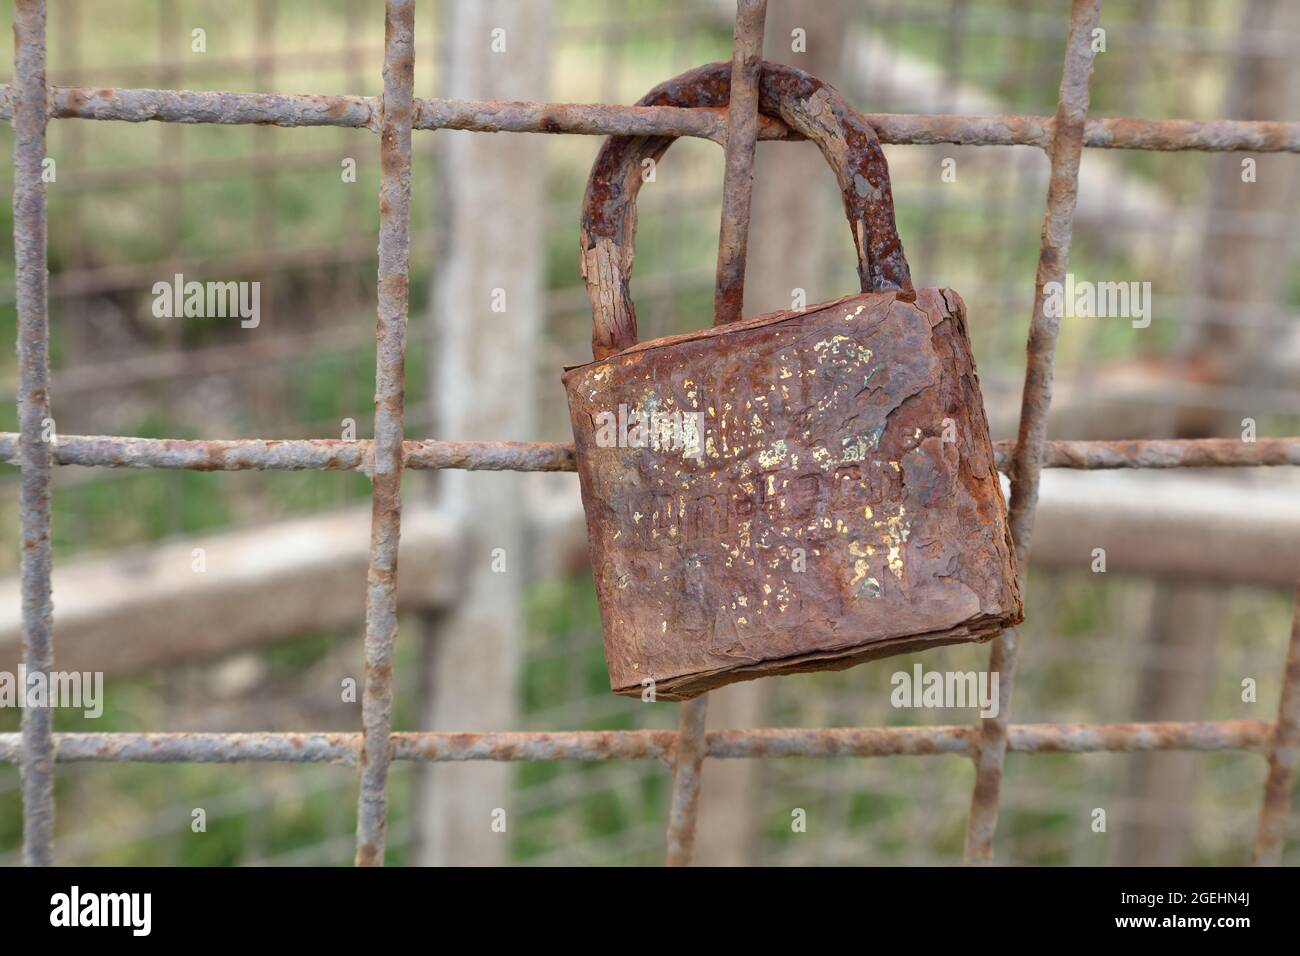 A steel padlock long since abandoned on a wire mesh frame of a gate, rapidly rusting away in the salty atmosphere. Stock Photo